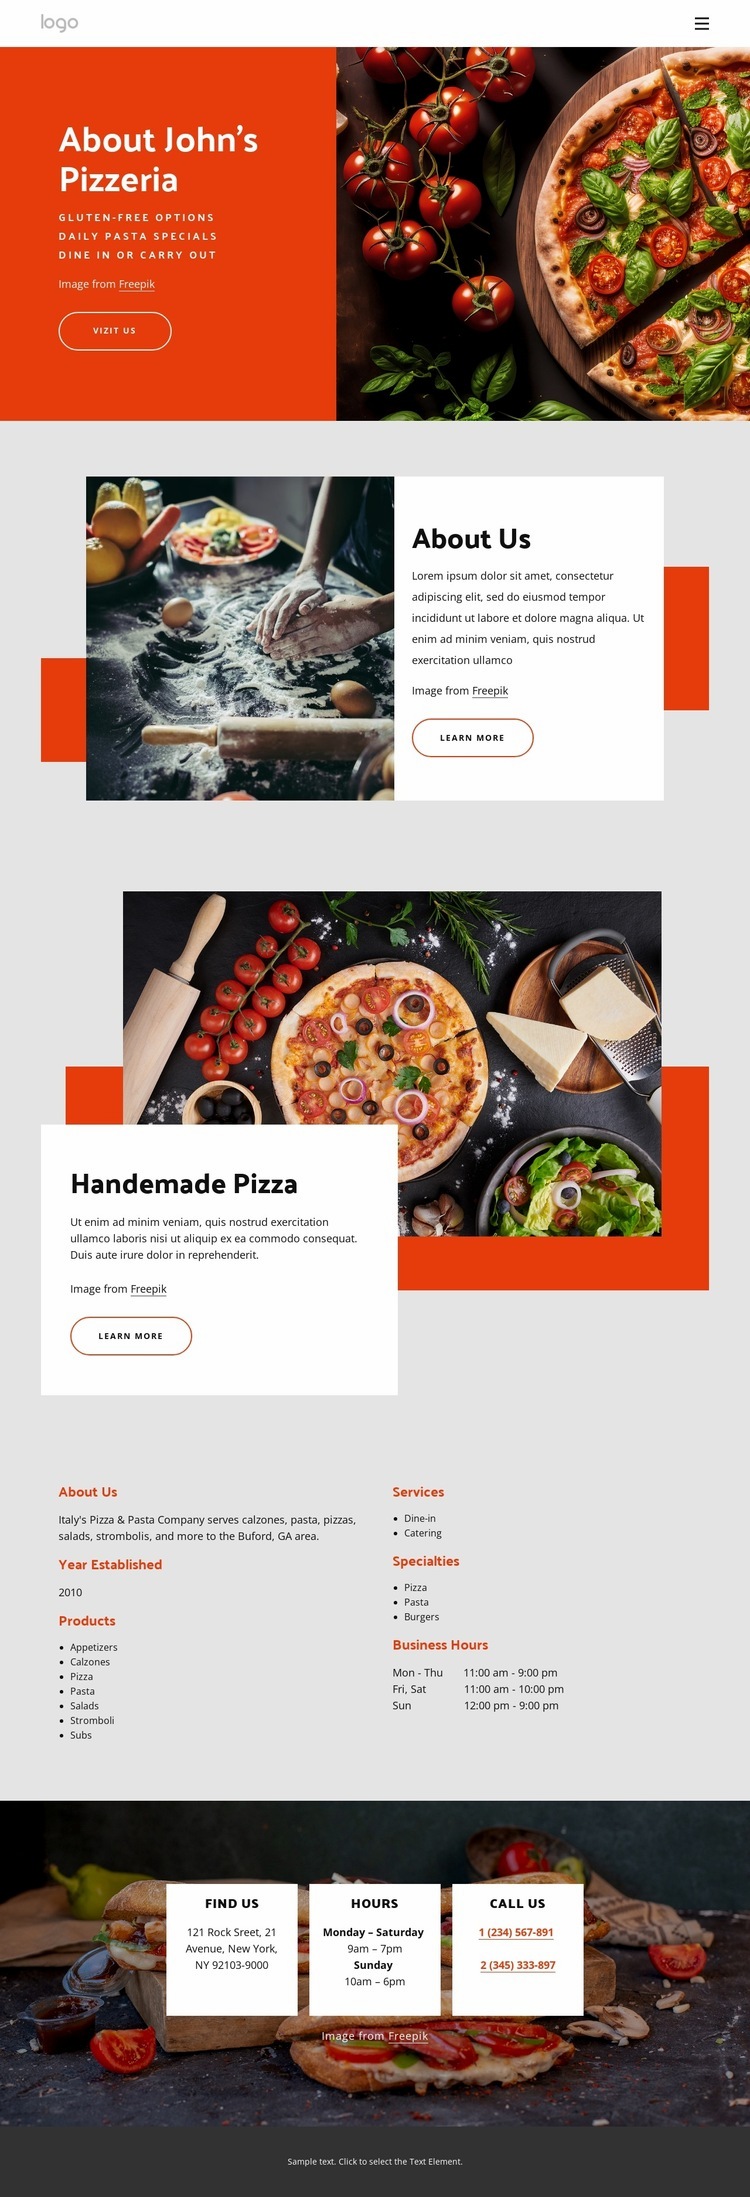 About our pizzeria Homepage Design